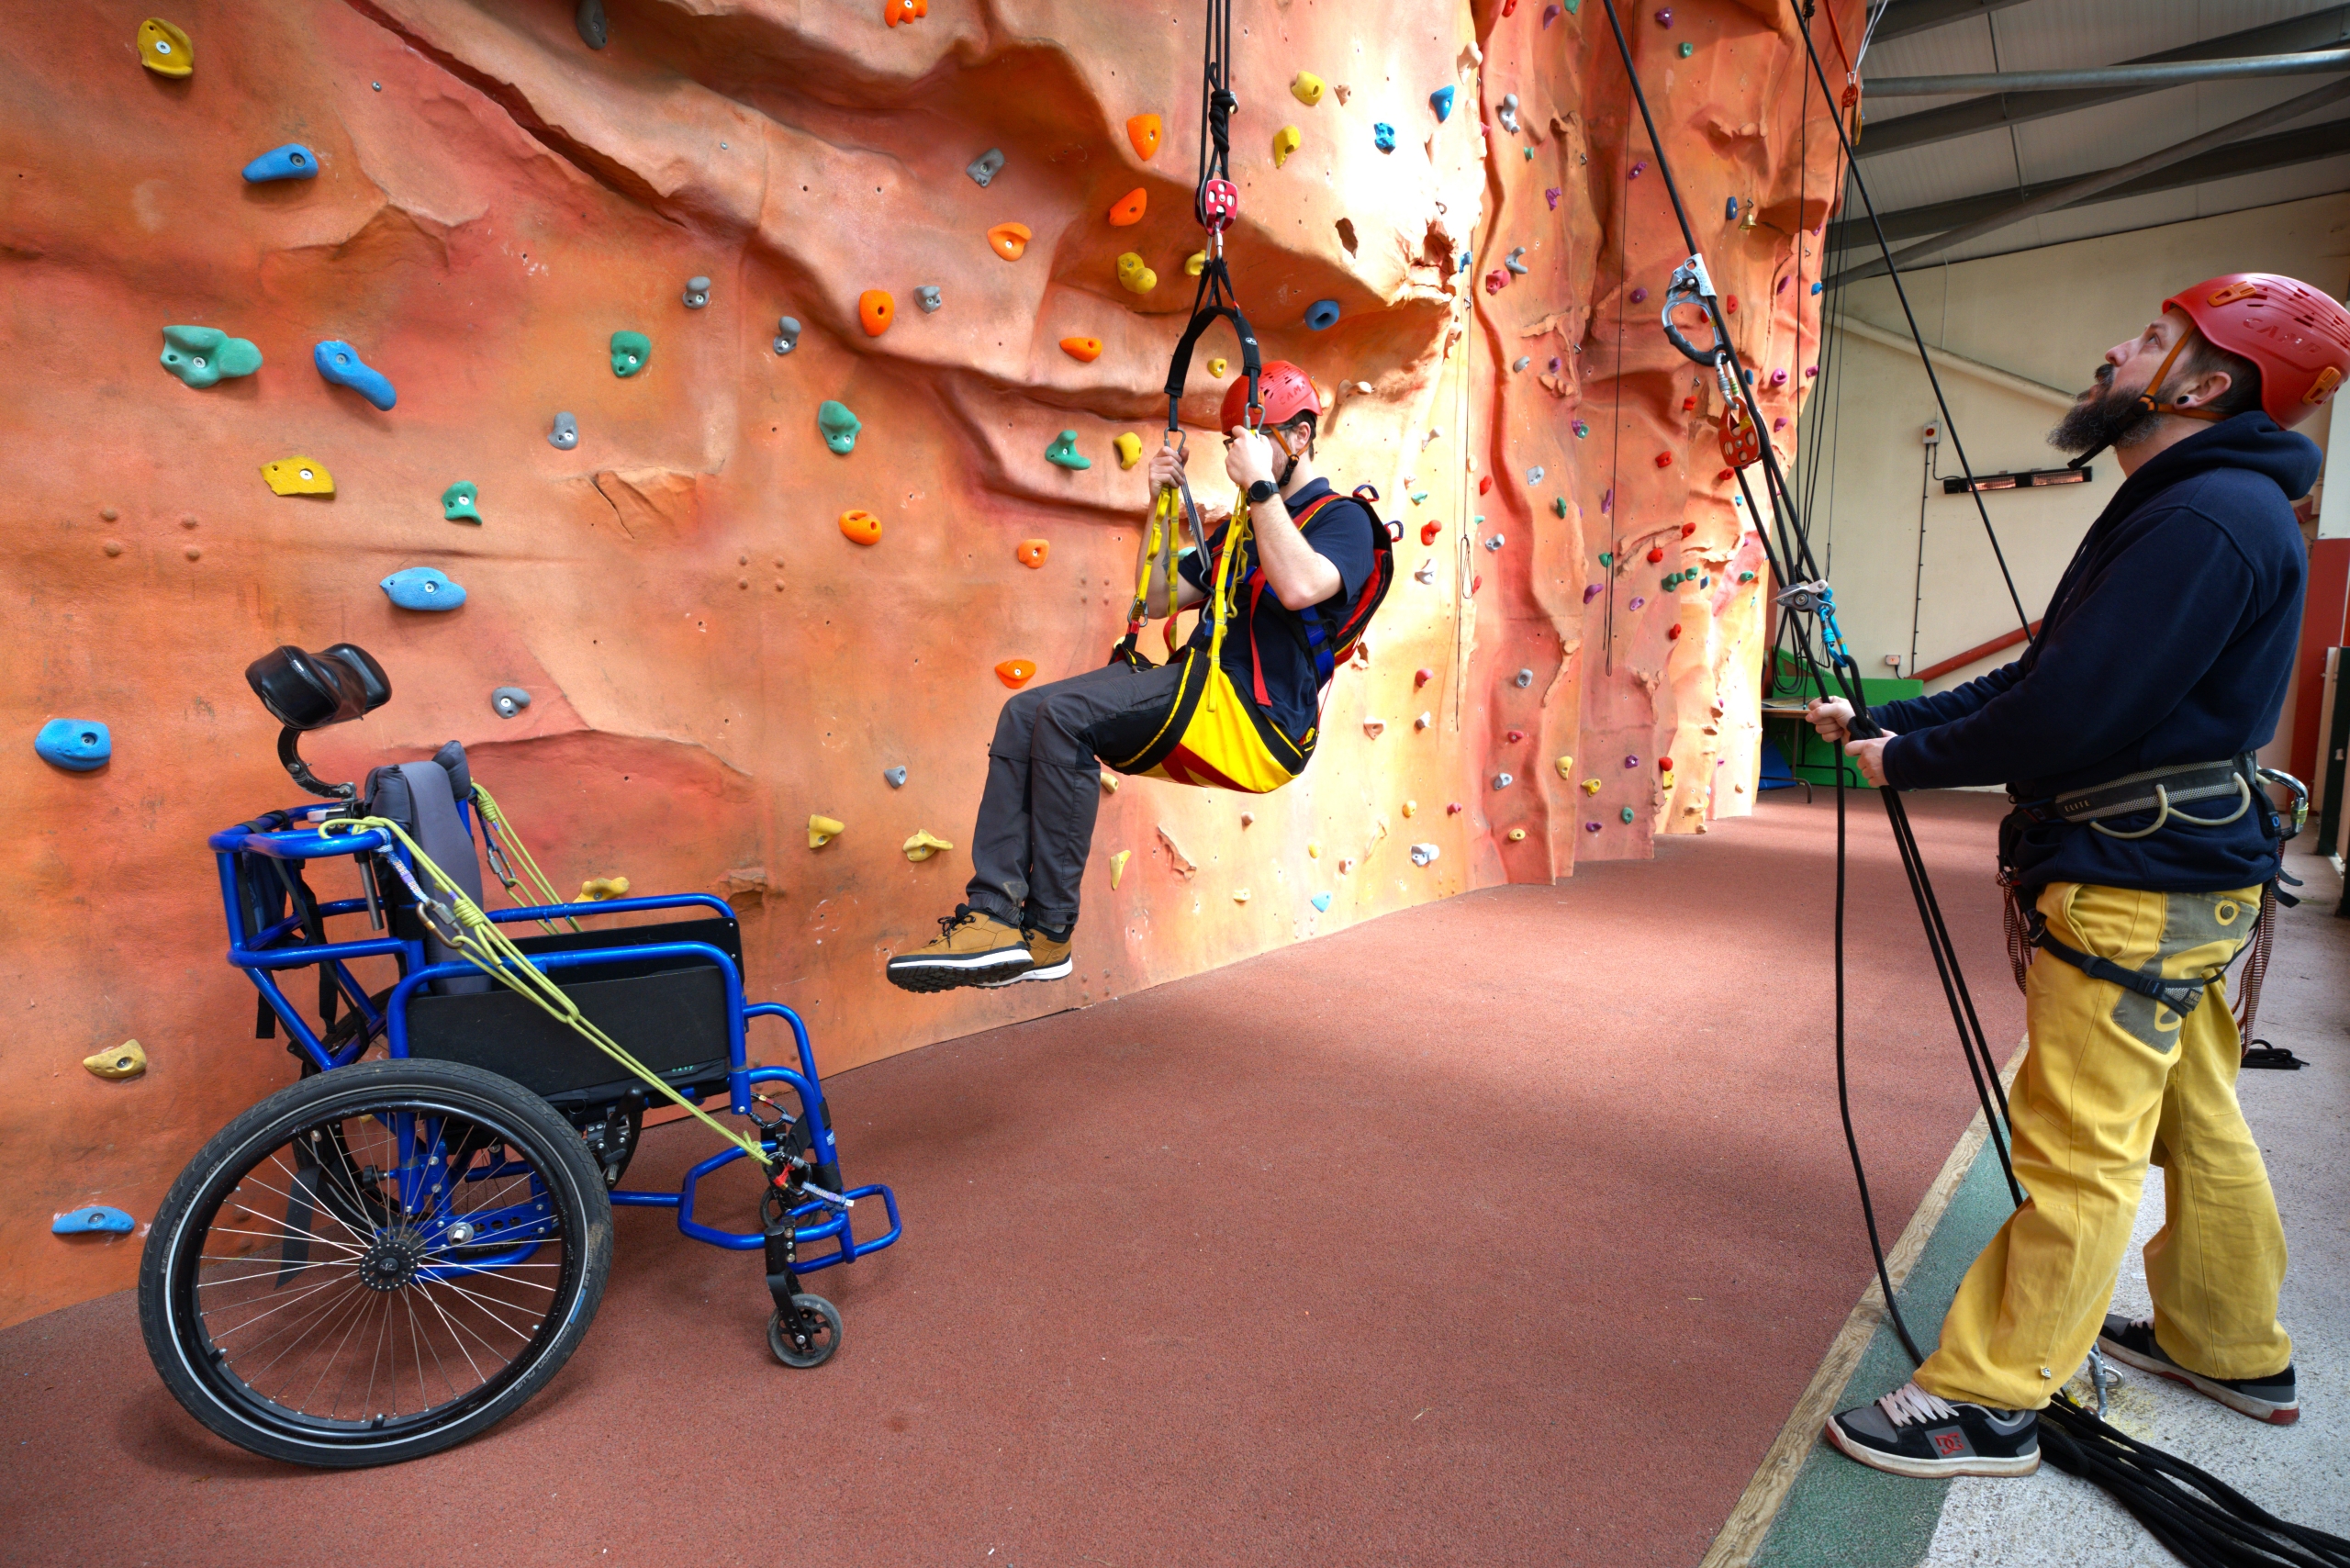 A member of Calvert Exmoor staff is sitting in the accessible sling and being suspended above the ground by another member of staff who is using a belay system in the foreground. The blue abseiling chair is to the left of the picture.